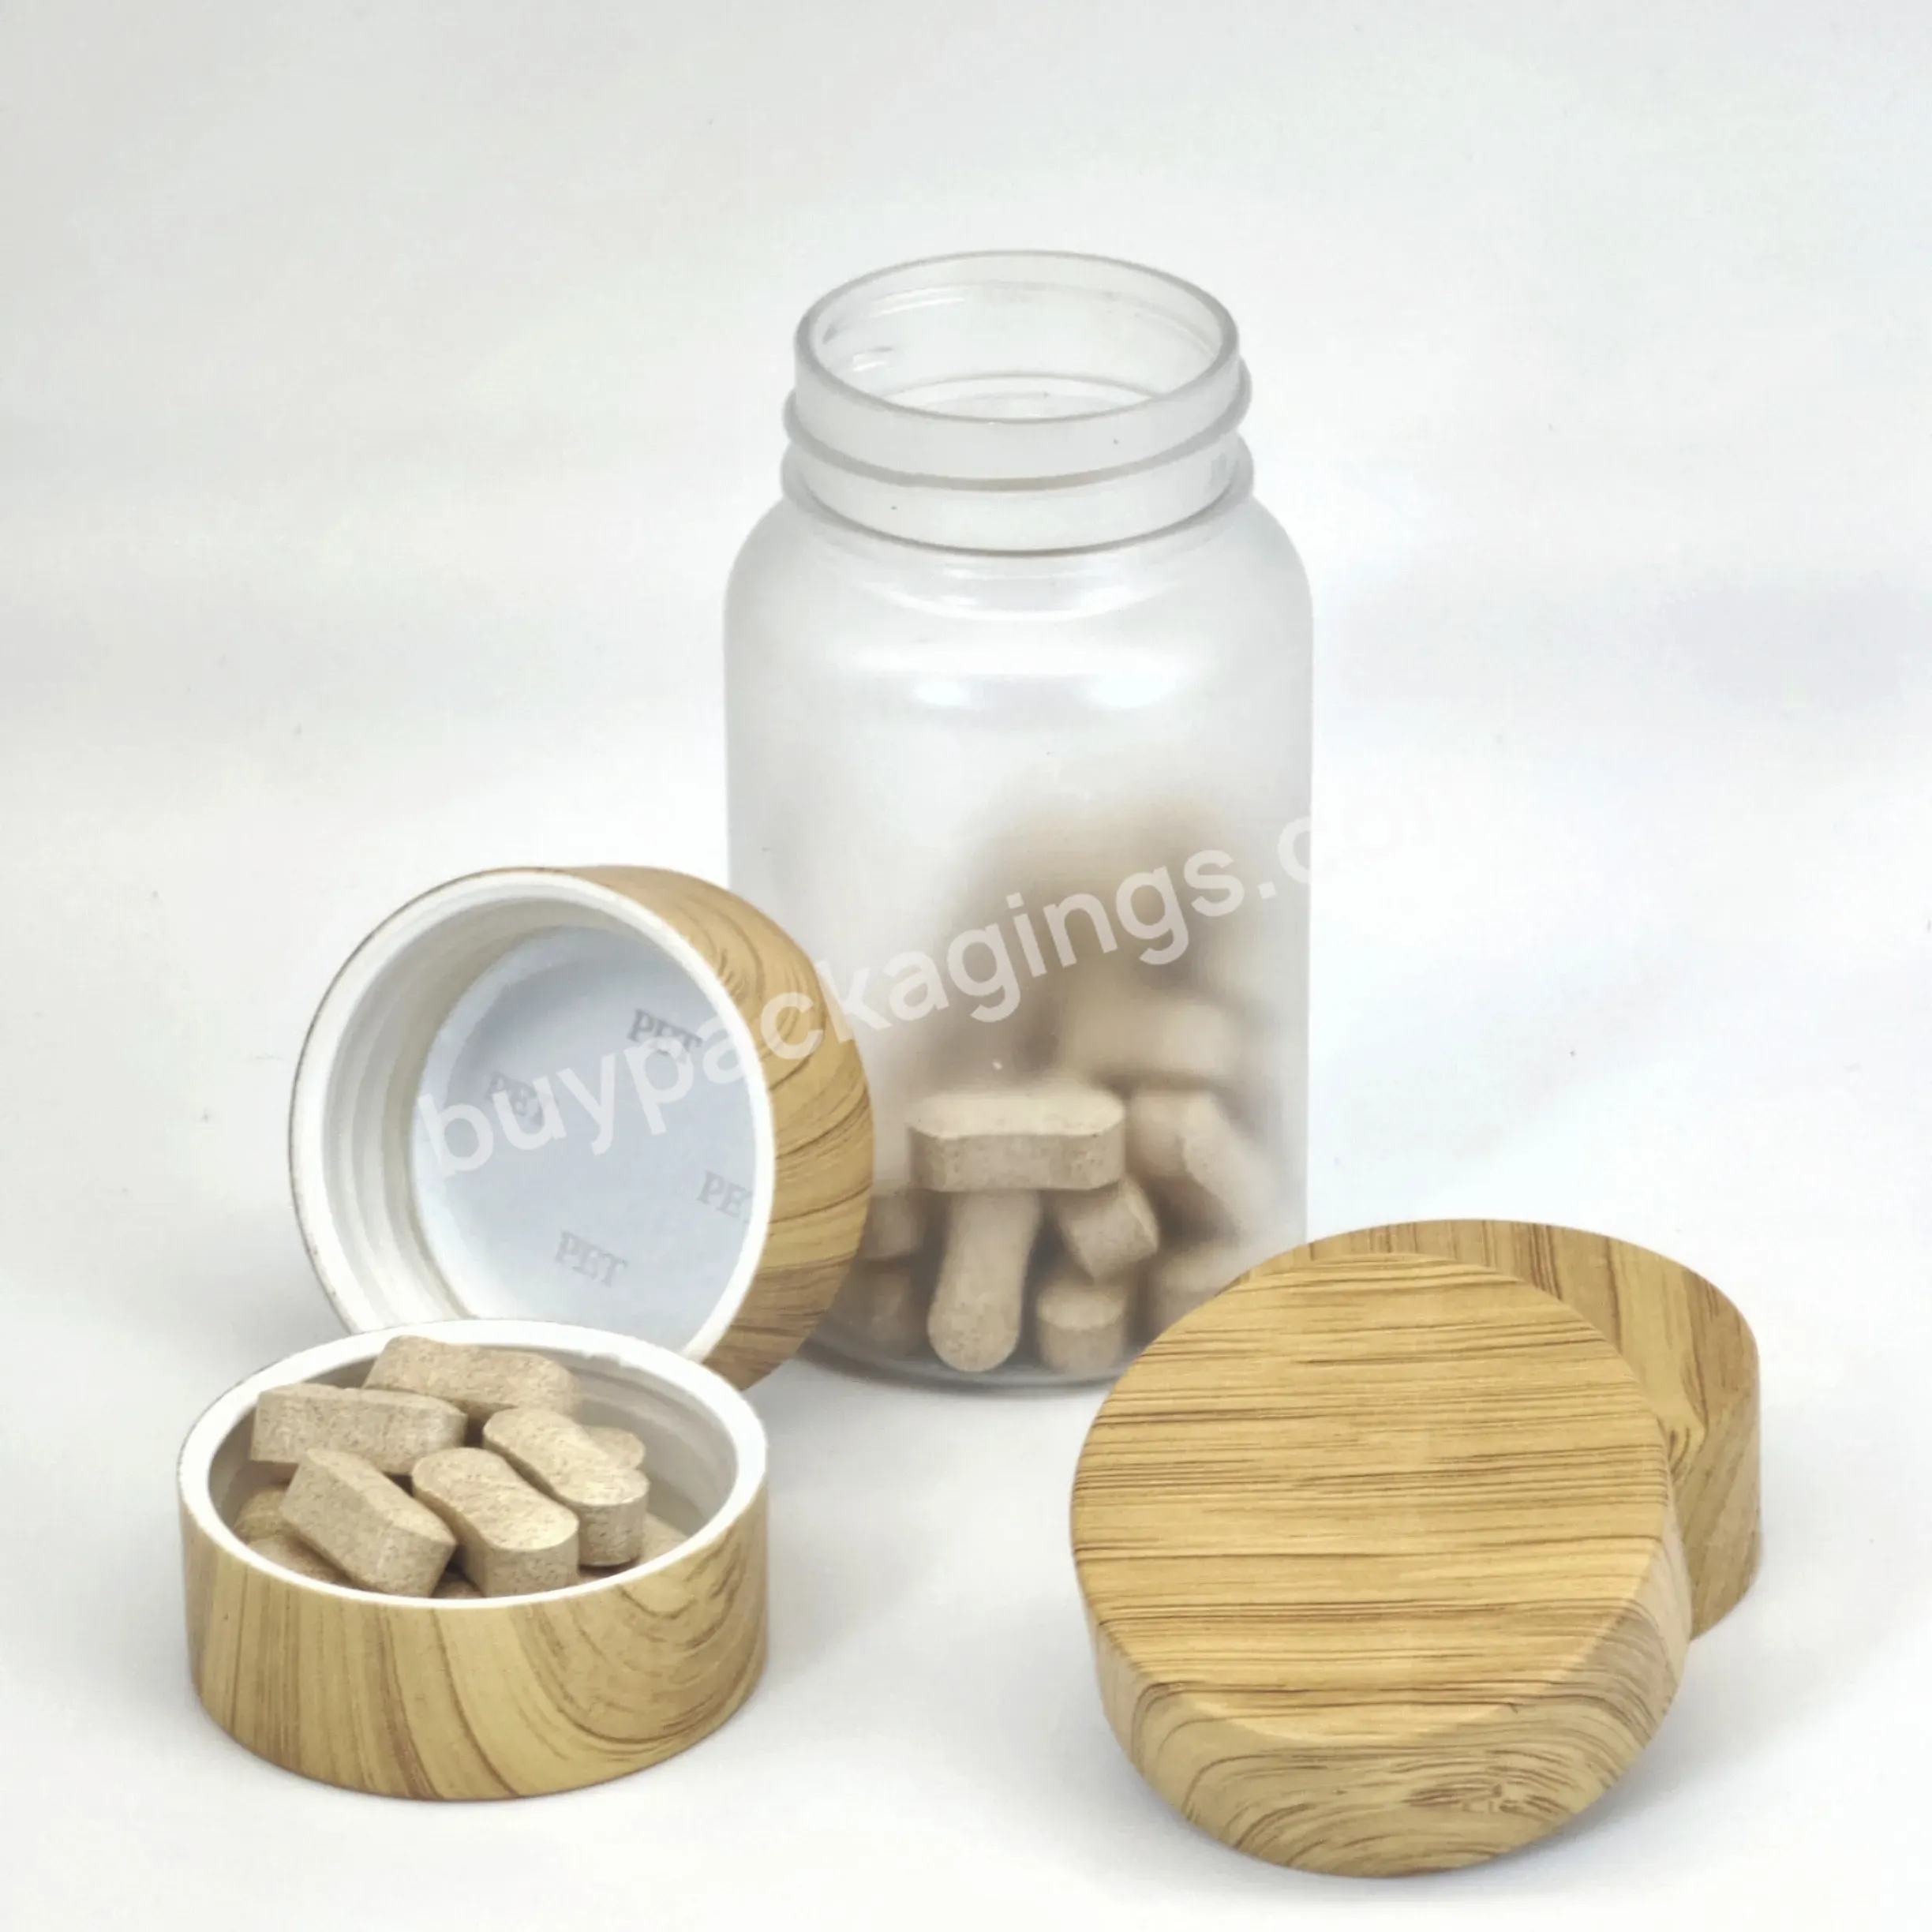 38mm Bamboo Products Bamboo Bottle Cap - Buy Bamboo Cap Products,Bamboo Wood Lids,Bamboo Bottle Cap.